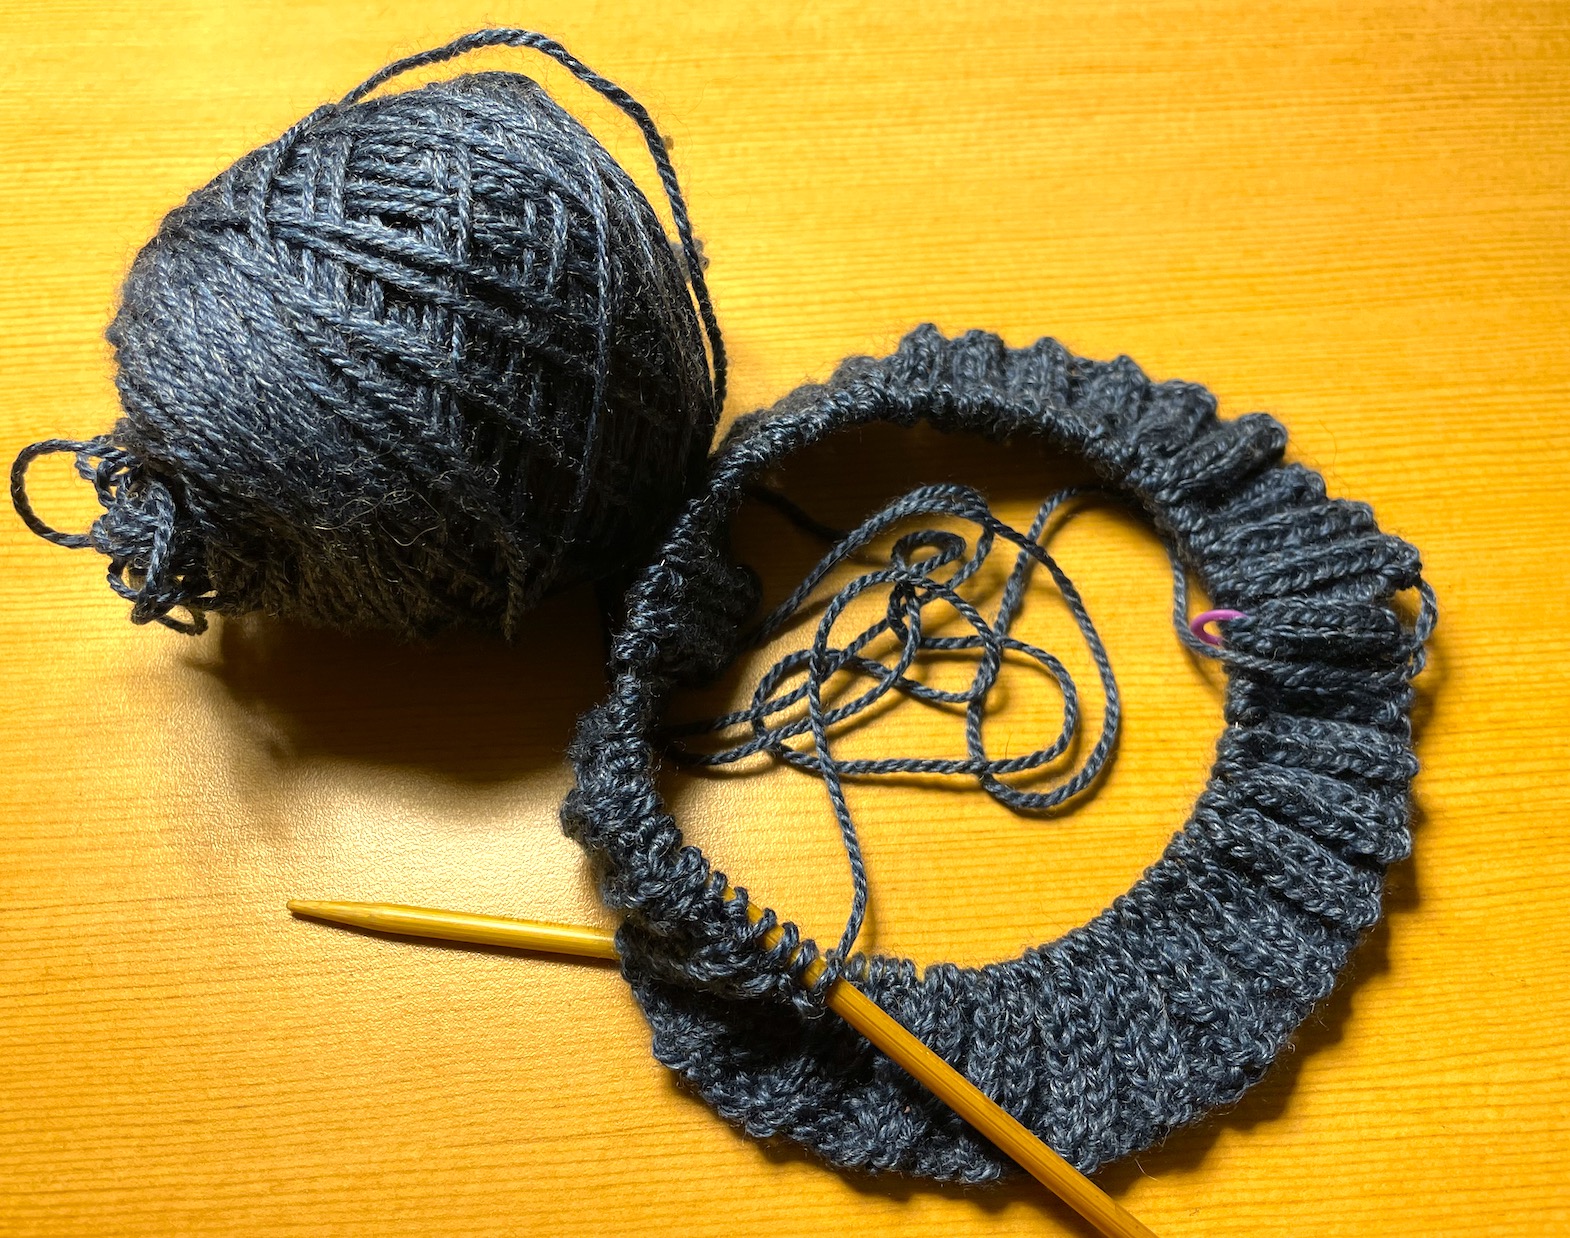 A ball of blue yarn and the beginning of a knitting project on circular knitting needles